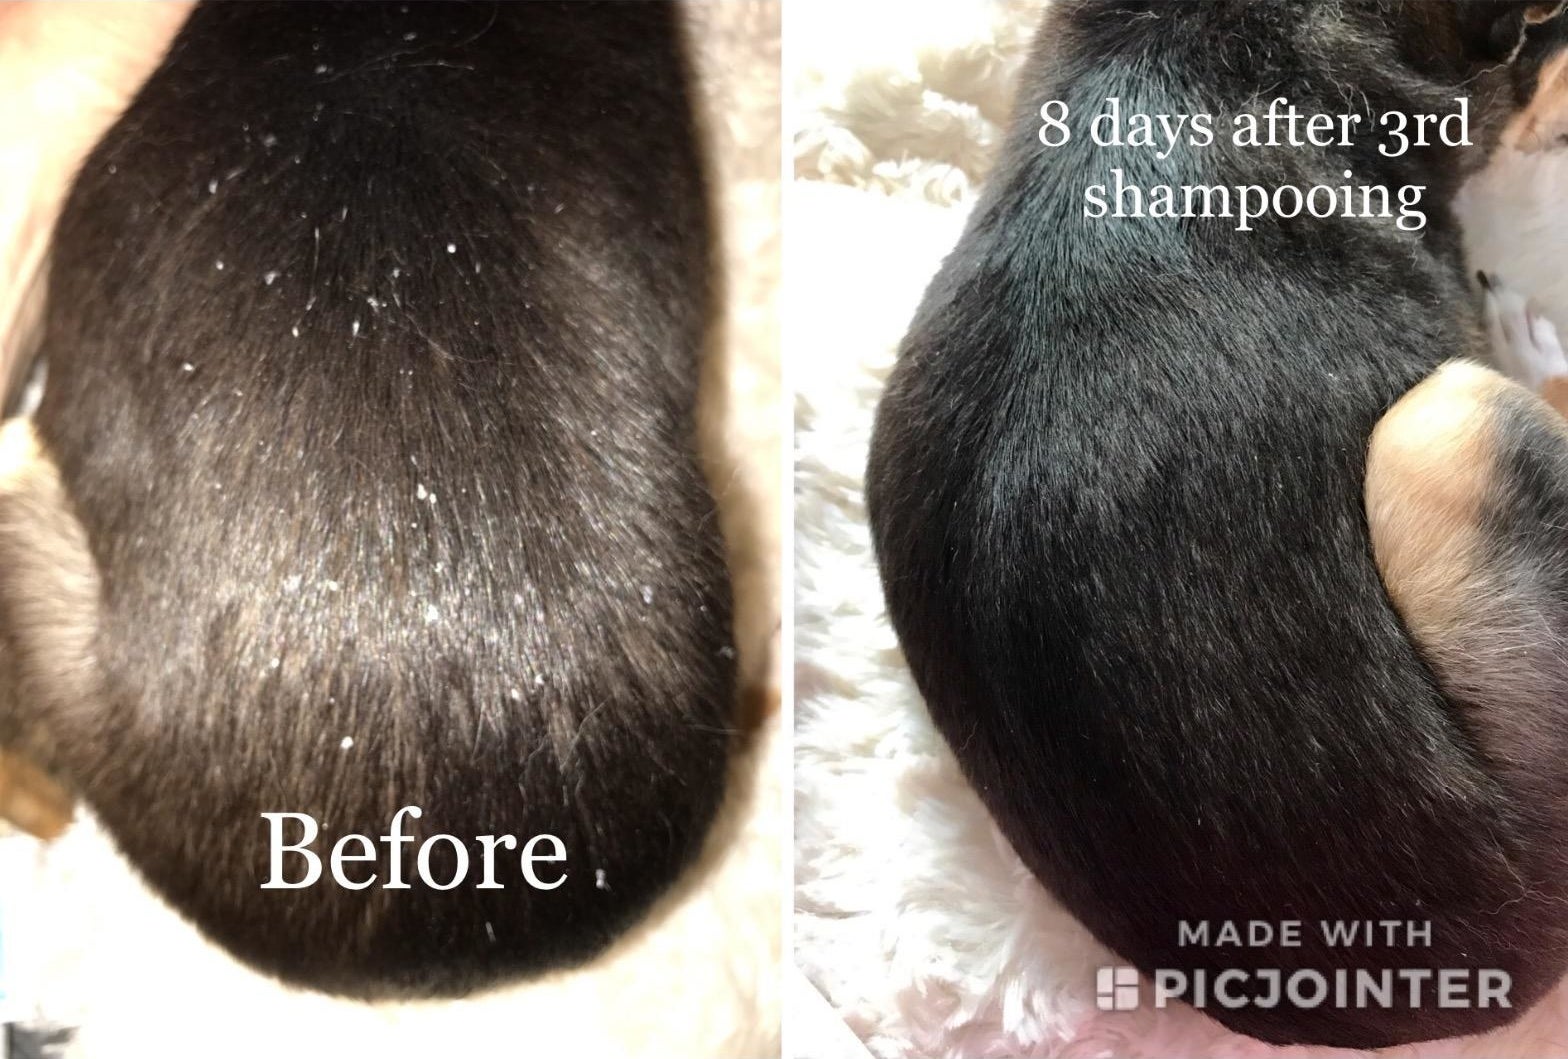 Reviewer photo showing results of using medicated shampoo on dog